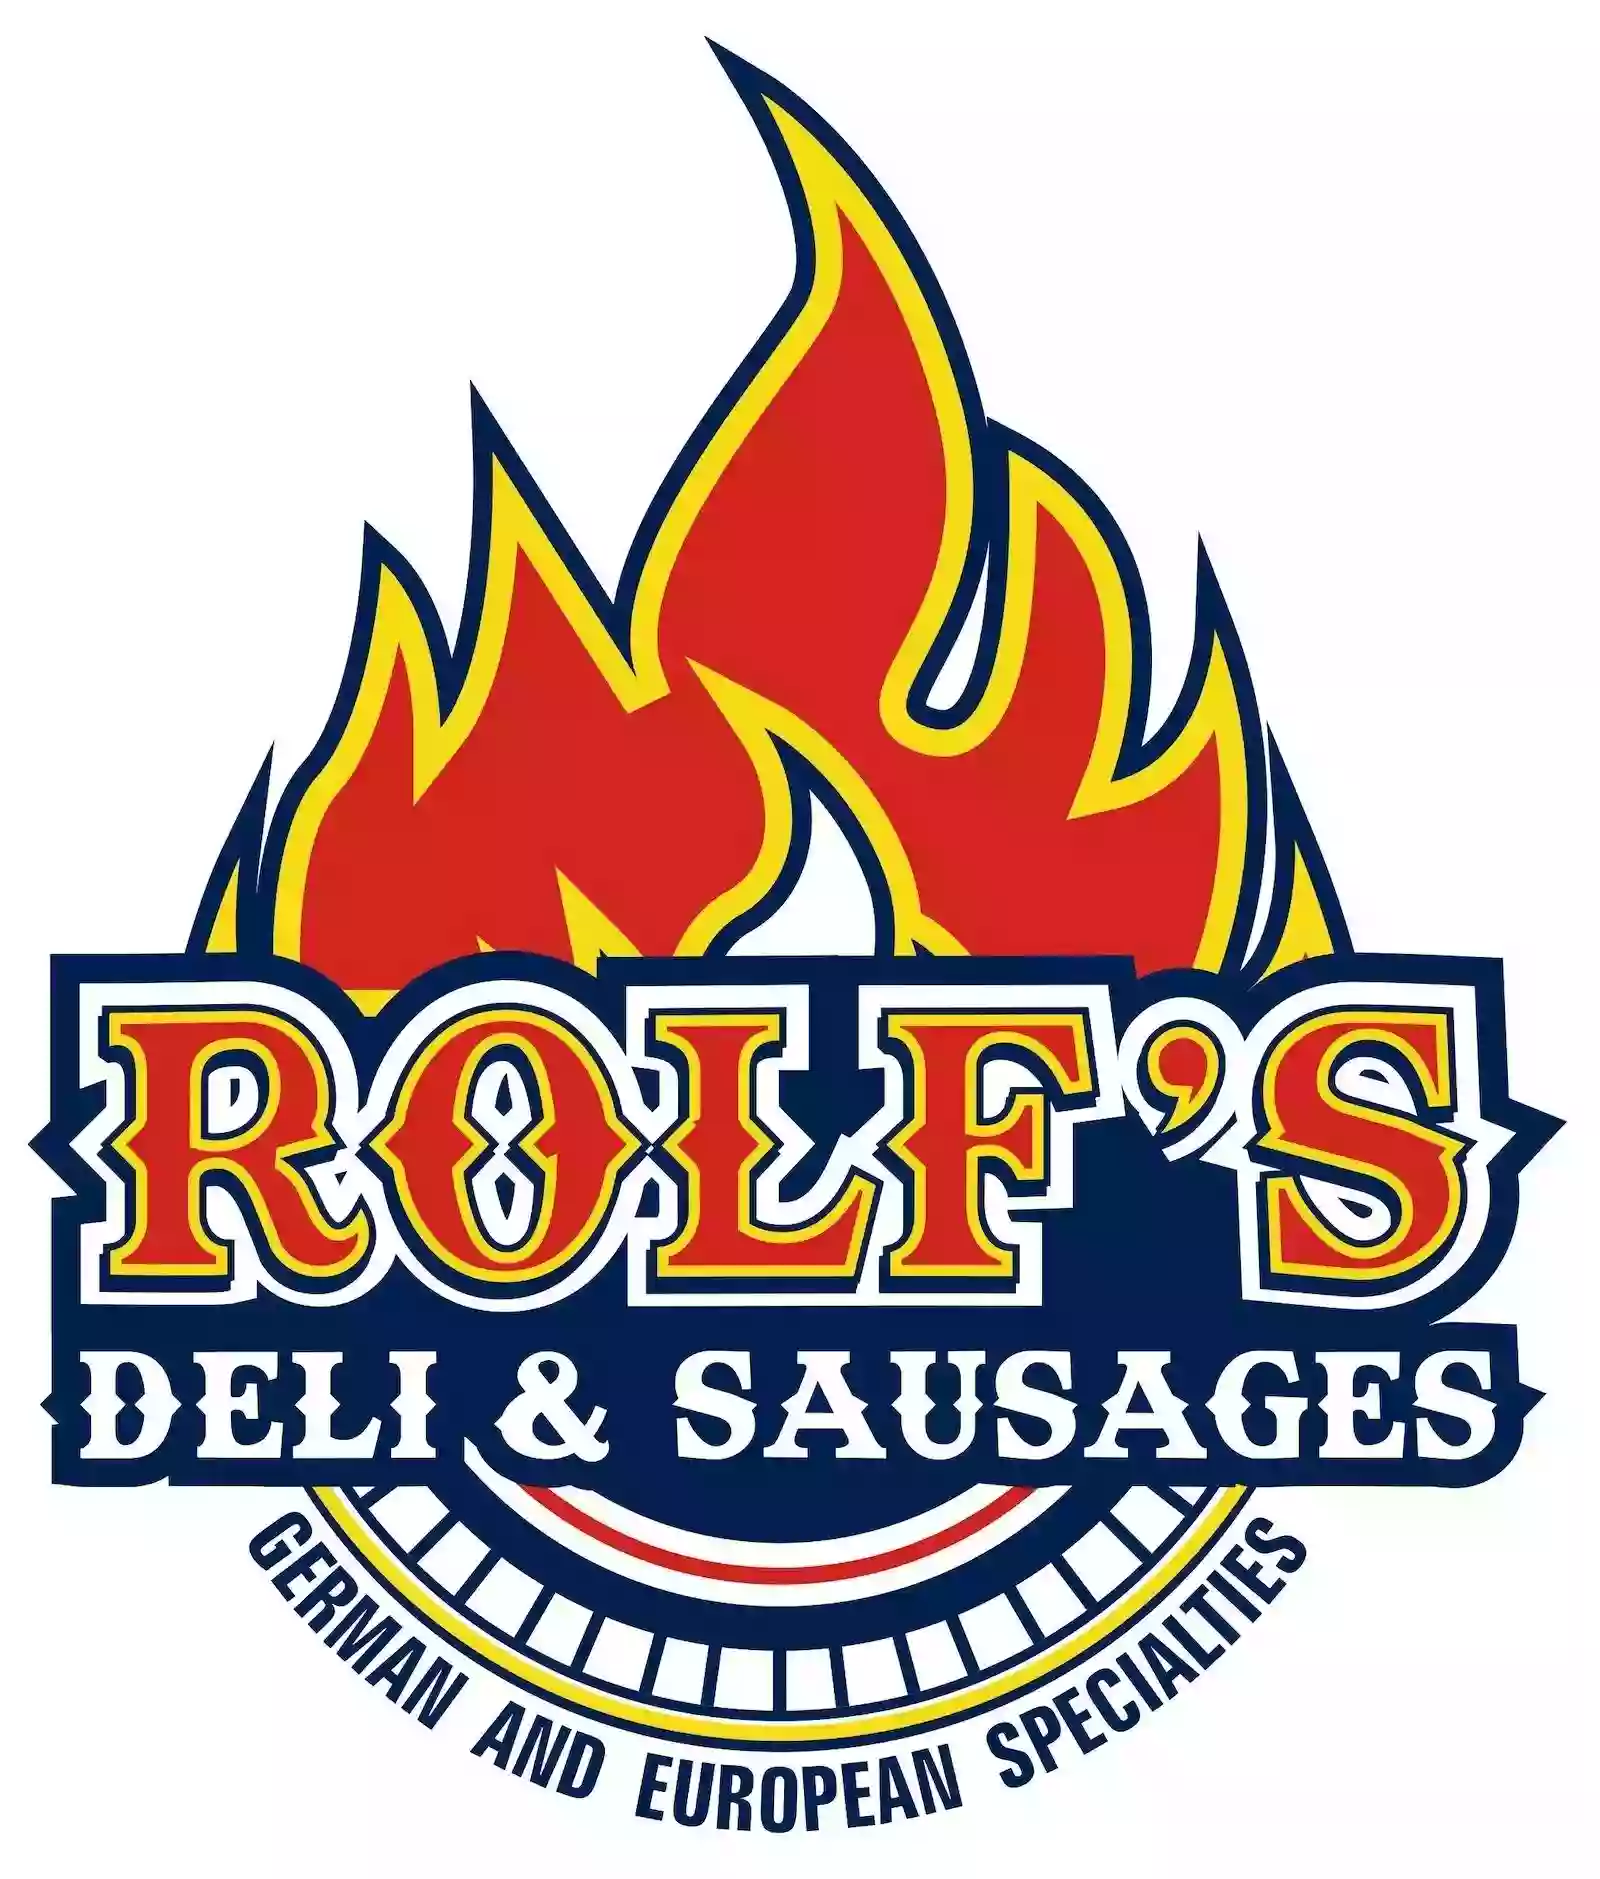 ROLF'S cafe' and Deli